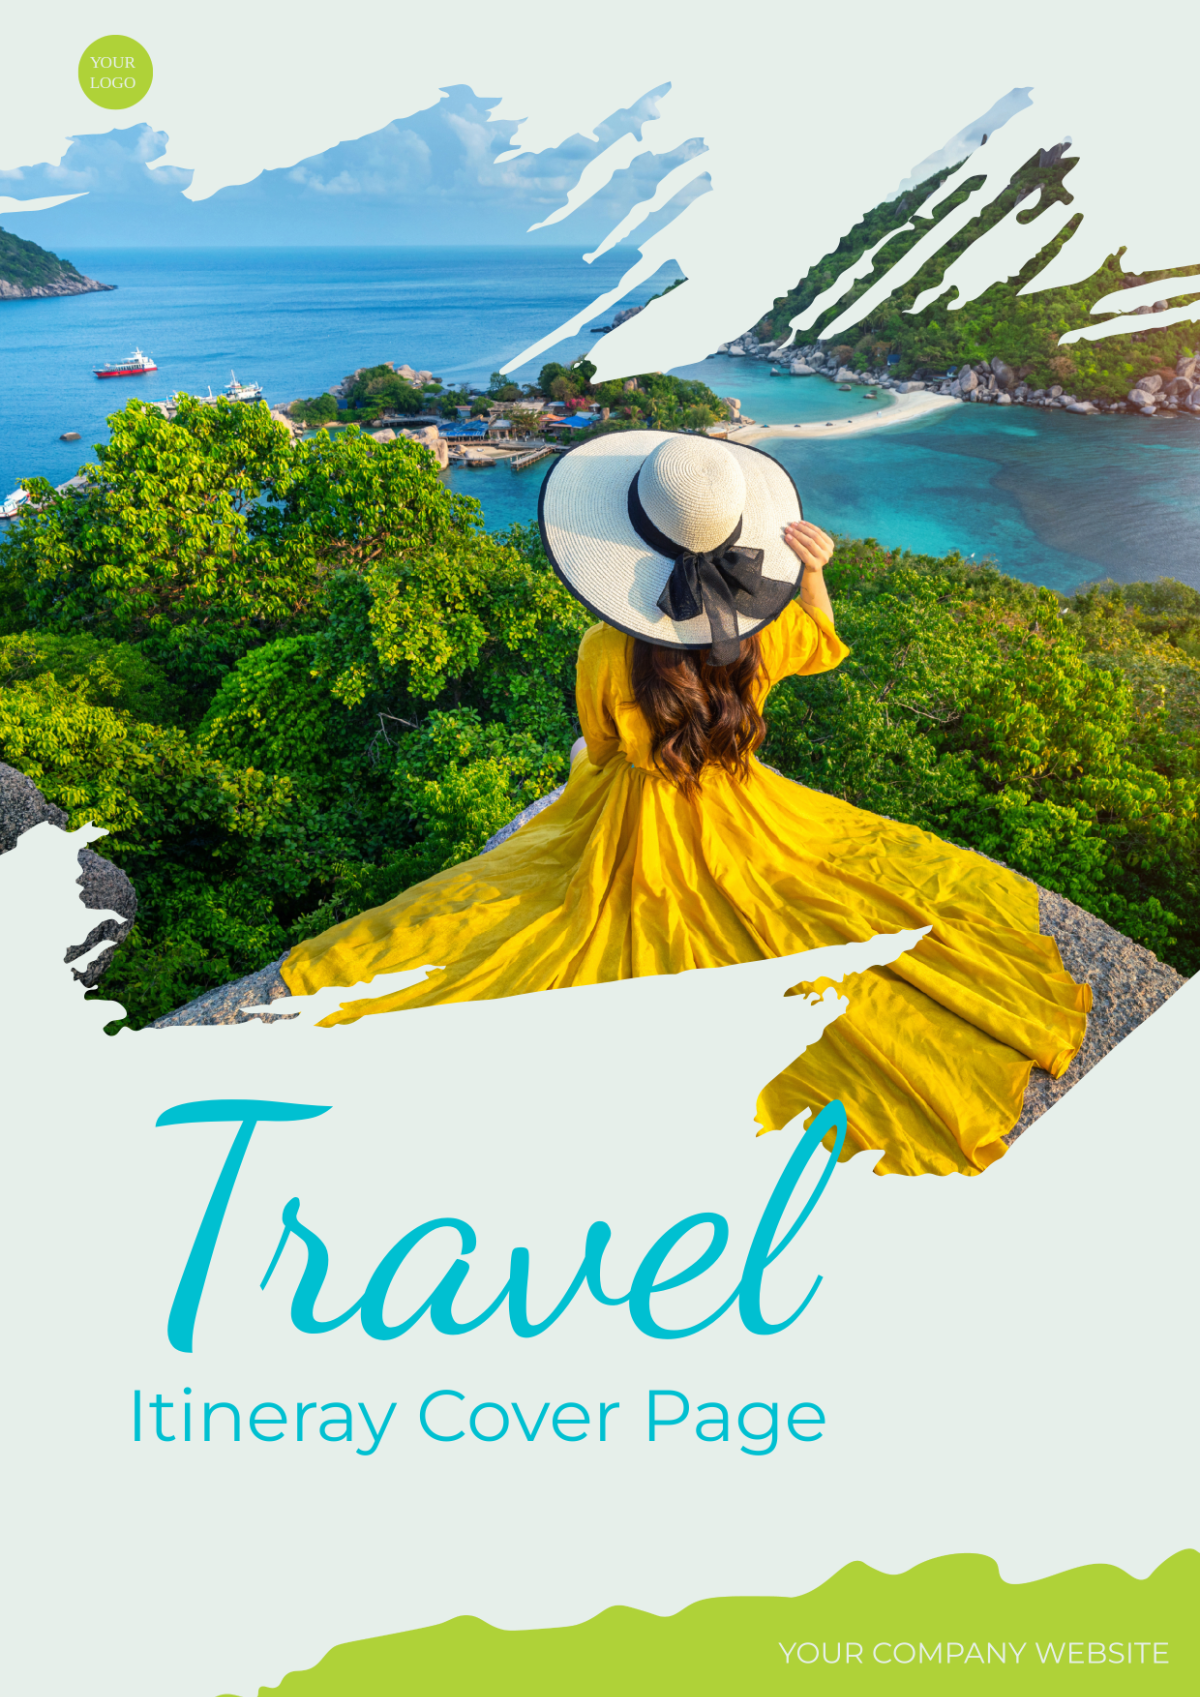 Free Travel Itinerary Cover Page